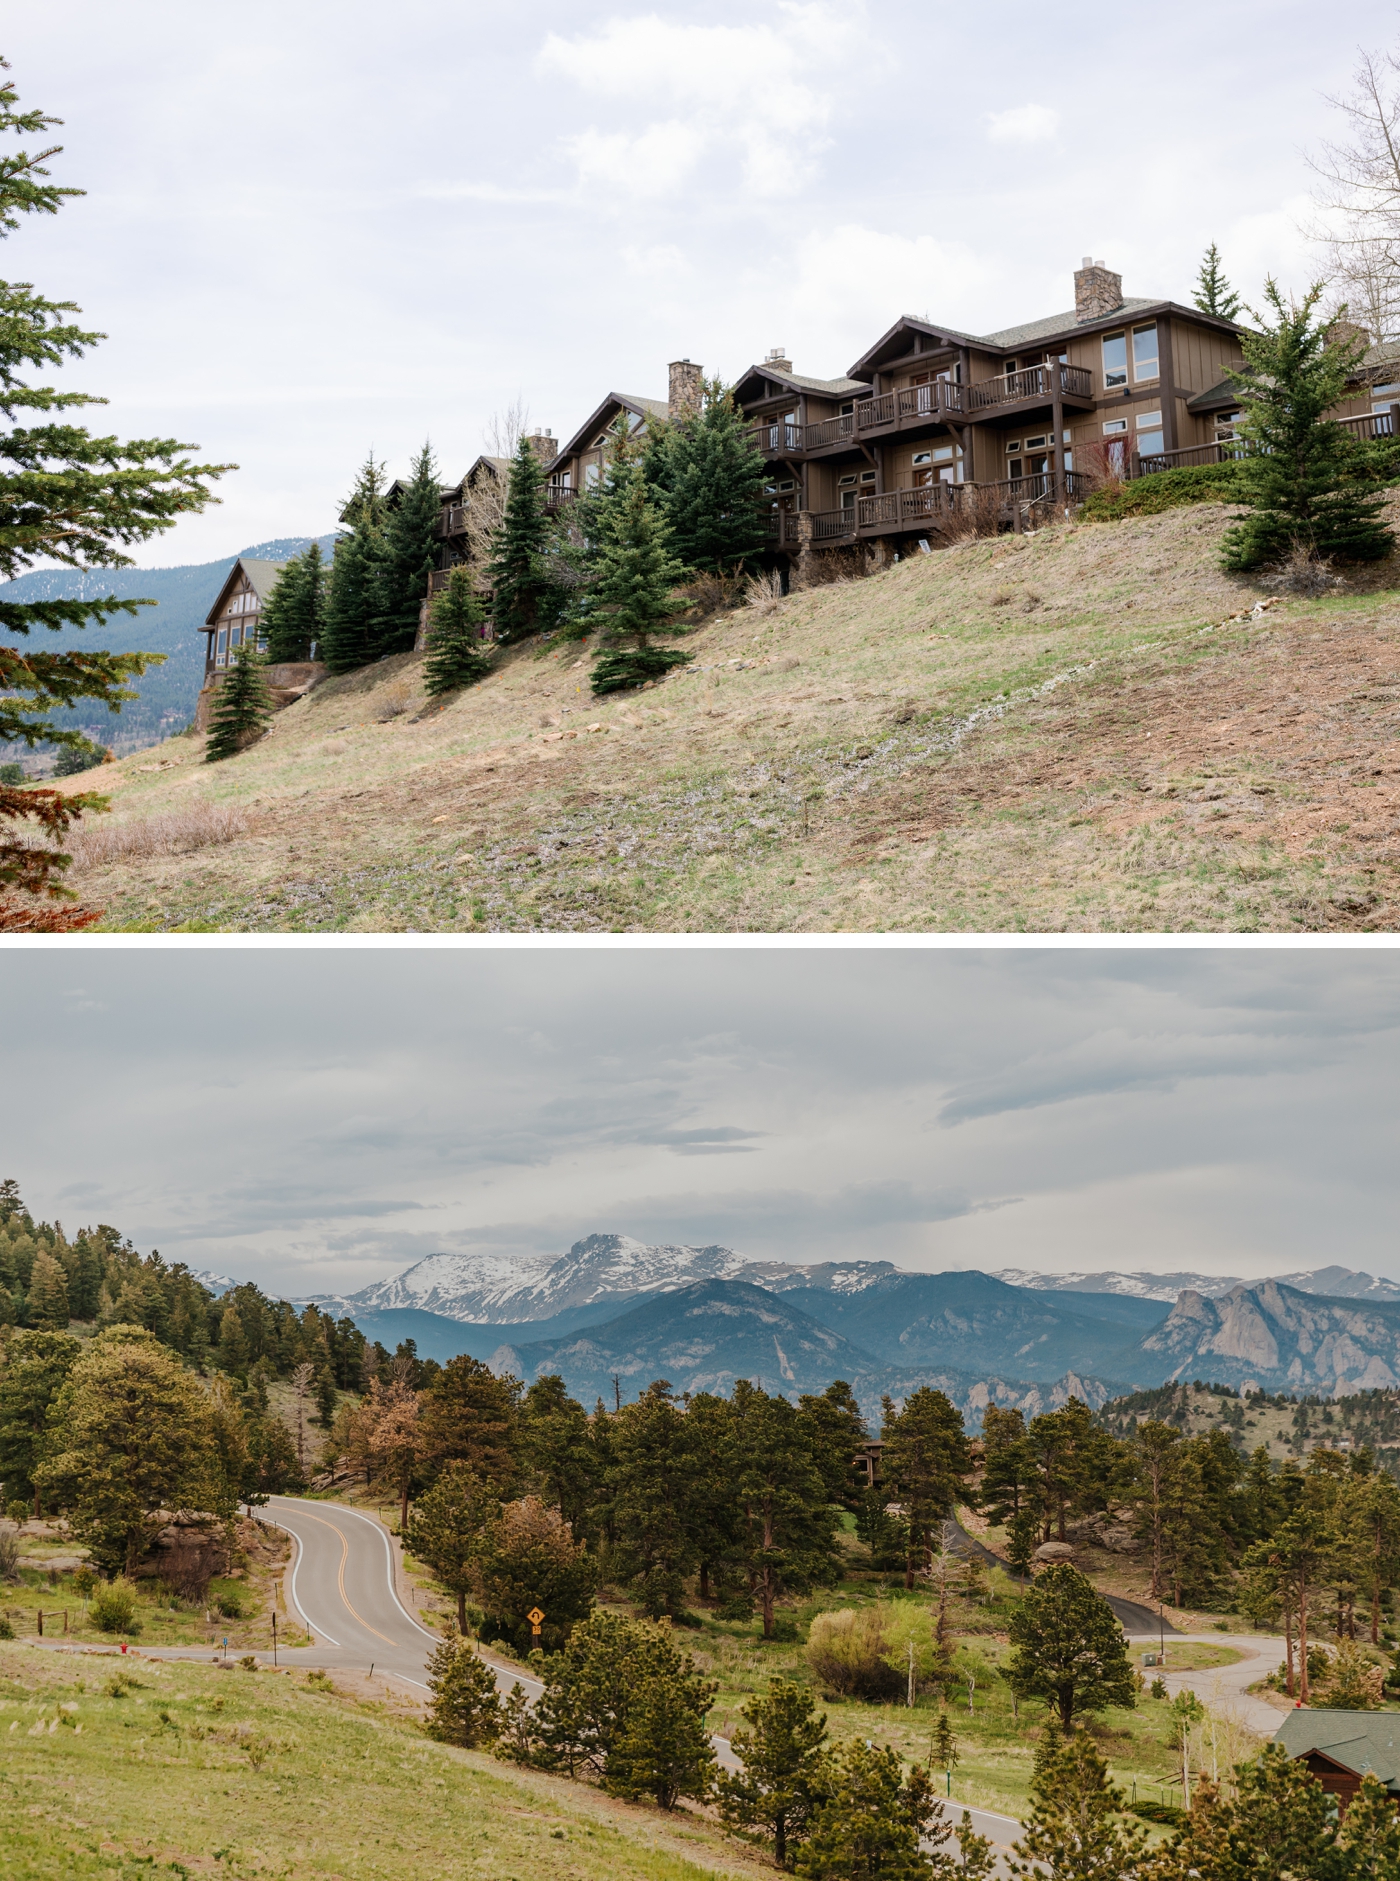 Estes Park Wedding Venue - What Sets Taharaa Mountain Lodge Apart From The Rest